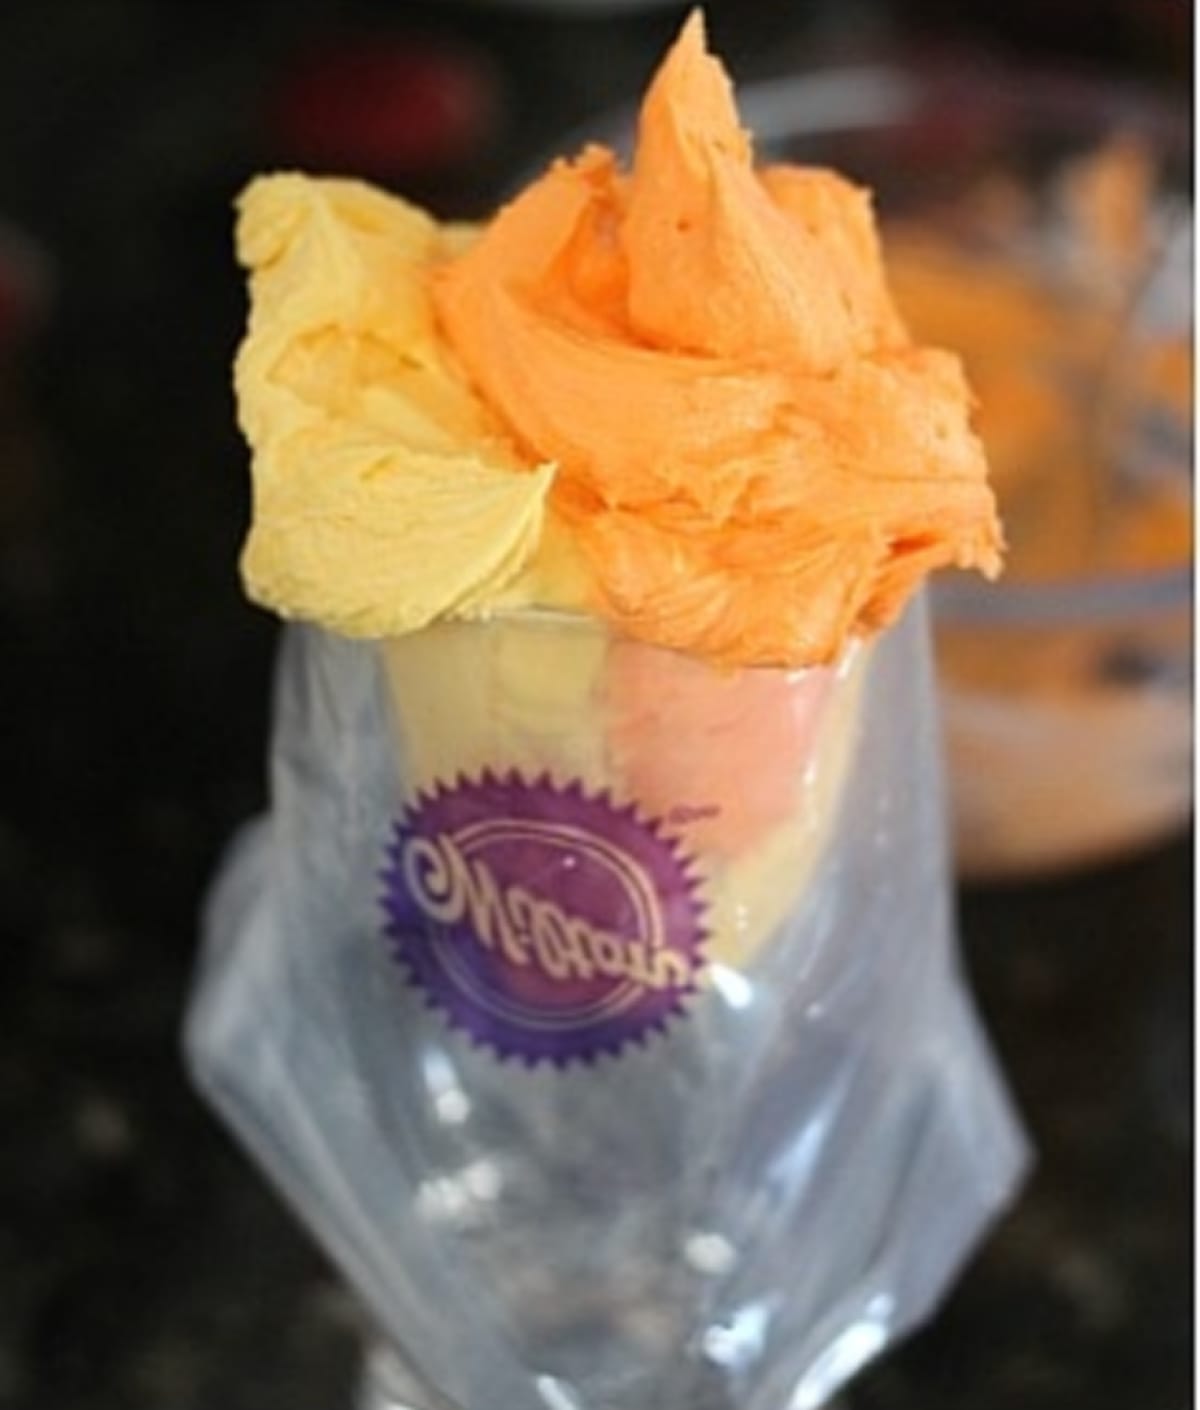 Filling a piping bag with orange and yellow frosting